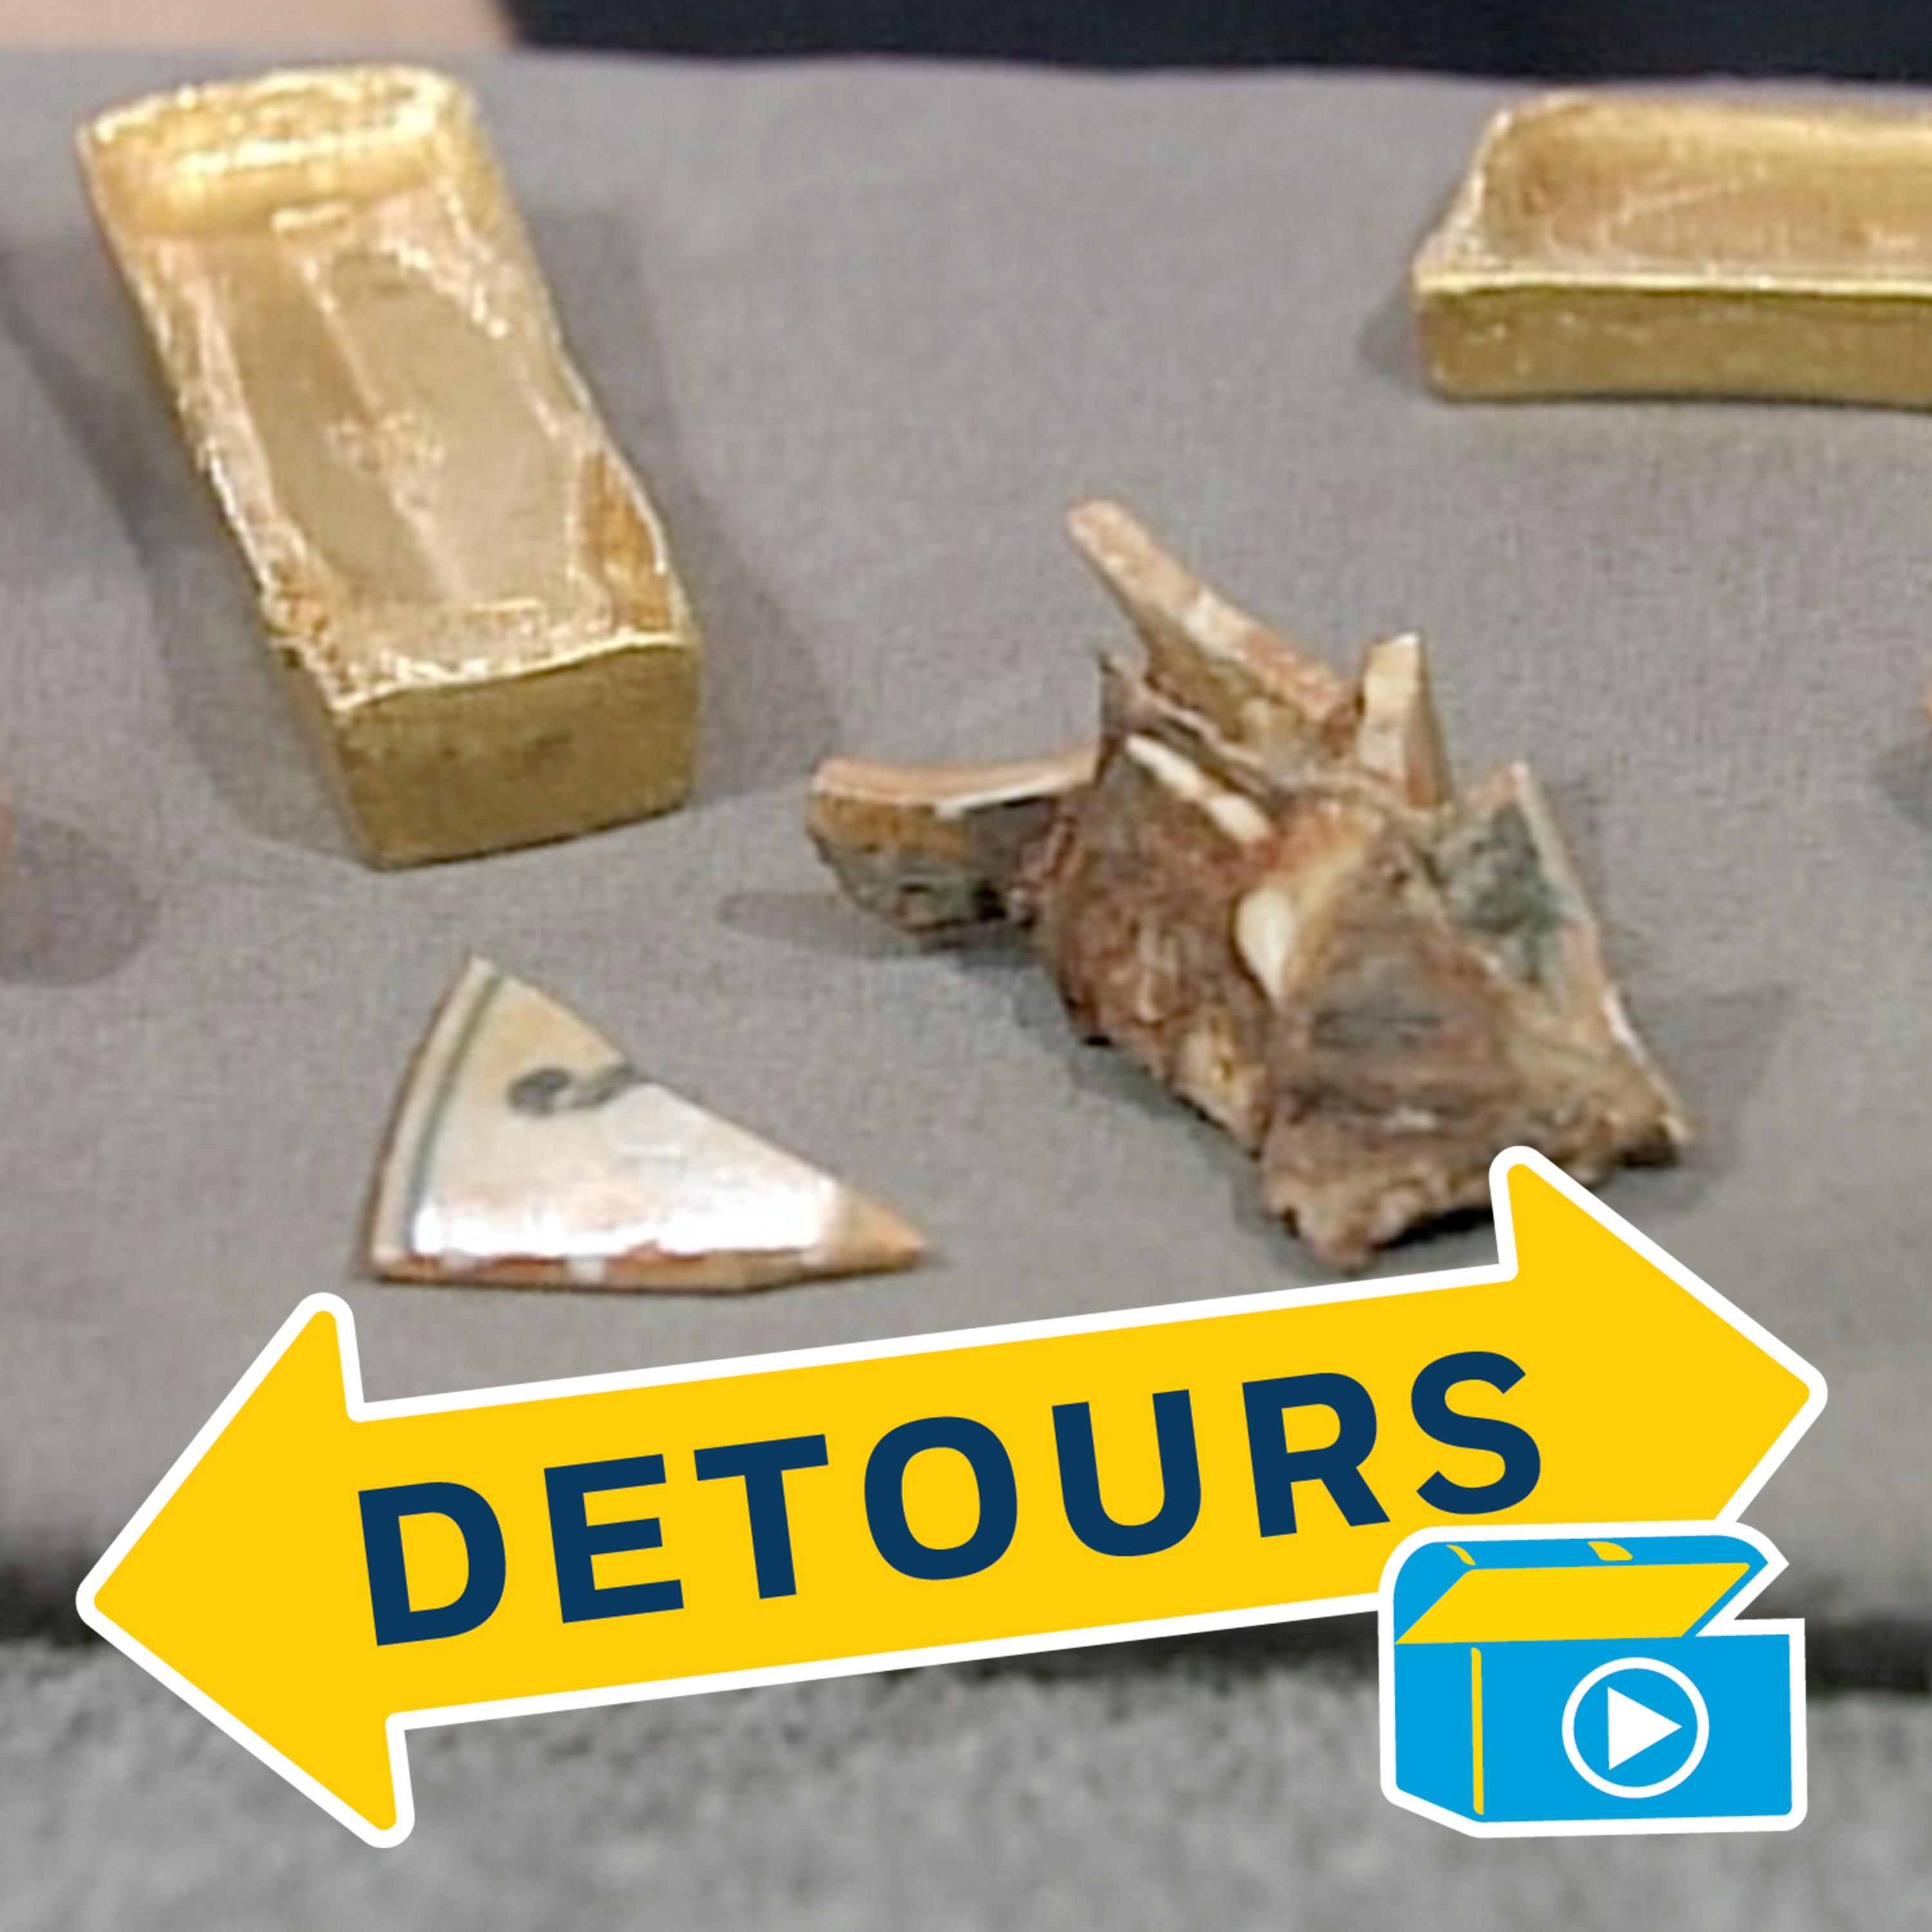 All that Glitters - Gold ingots, retrieved from the ocean floor and appraised on America’s favorite antiques show back in 1999 are now the subject of an international investigation.